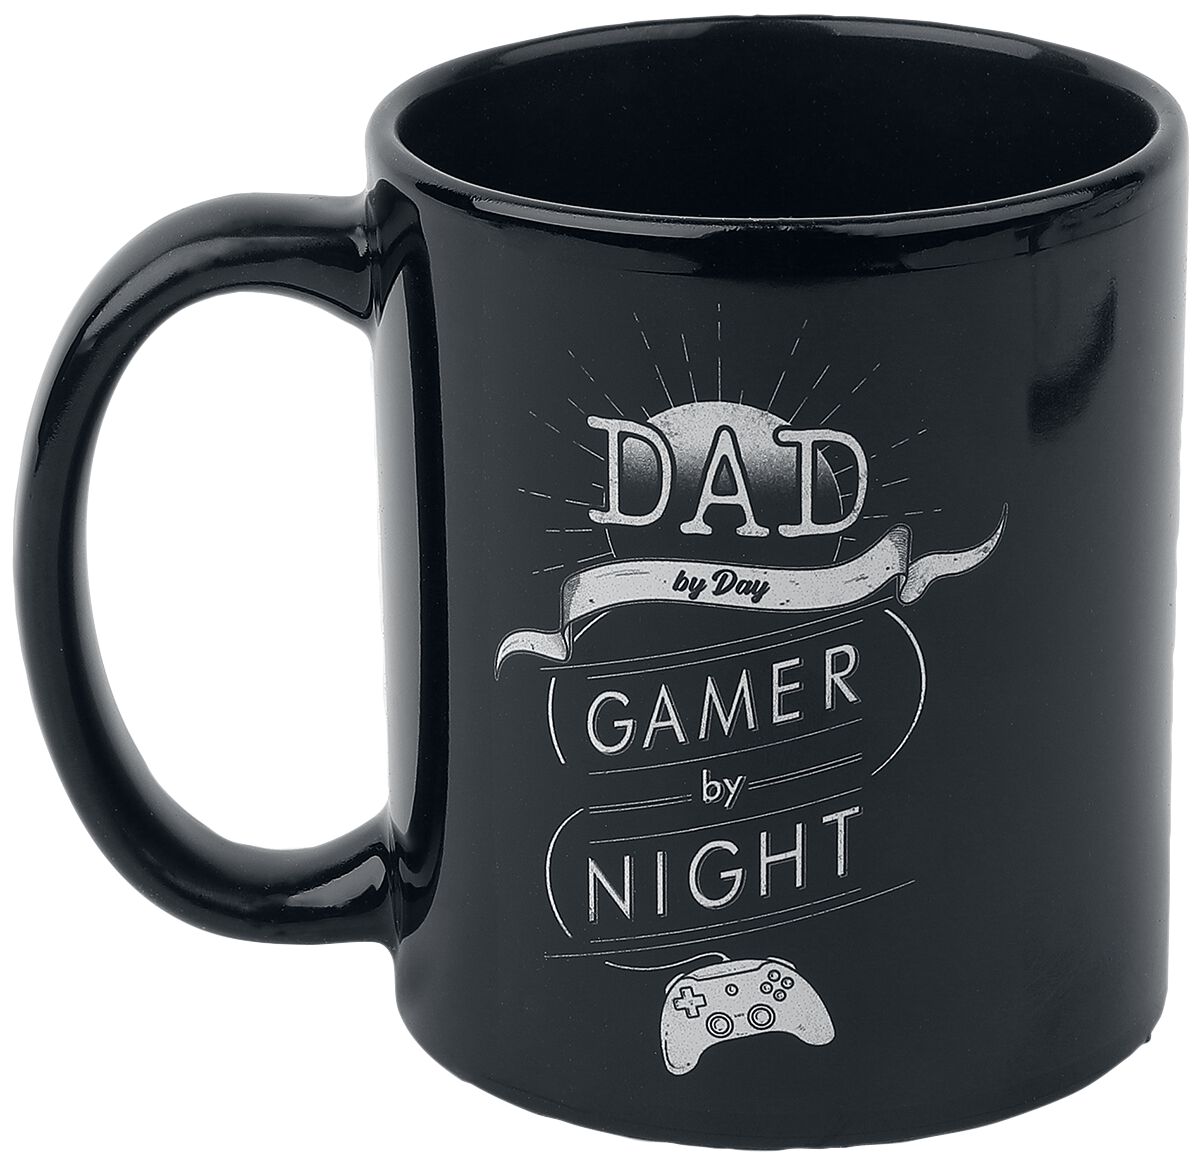 Dad By Day - Gamer By Night  Cup black